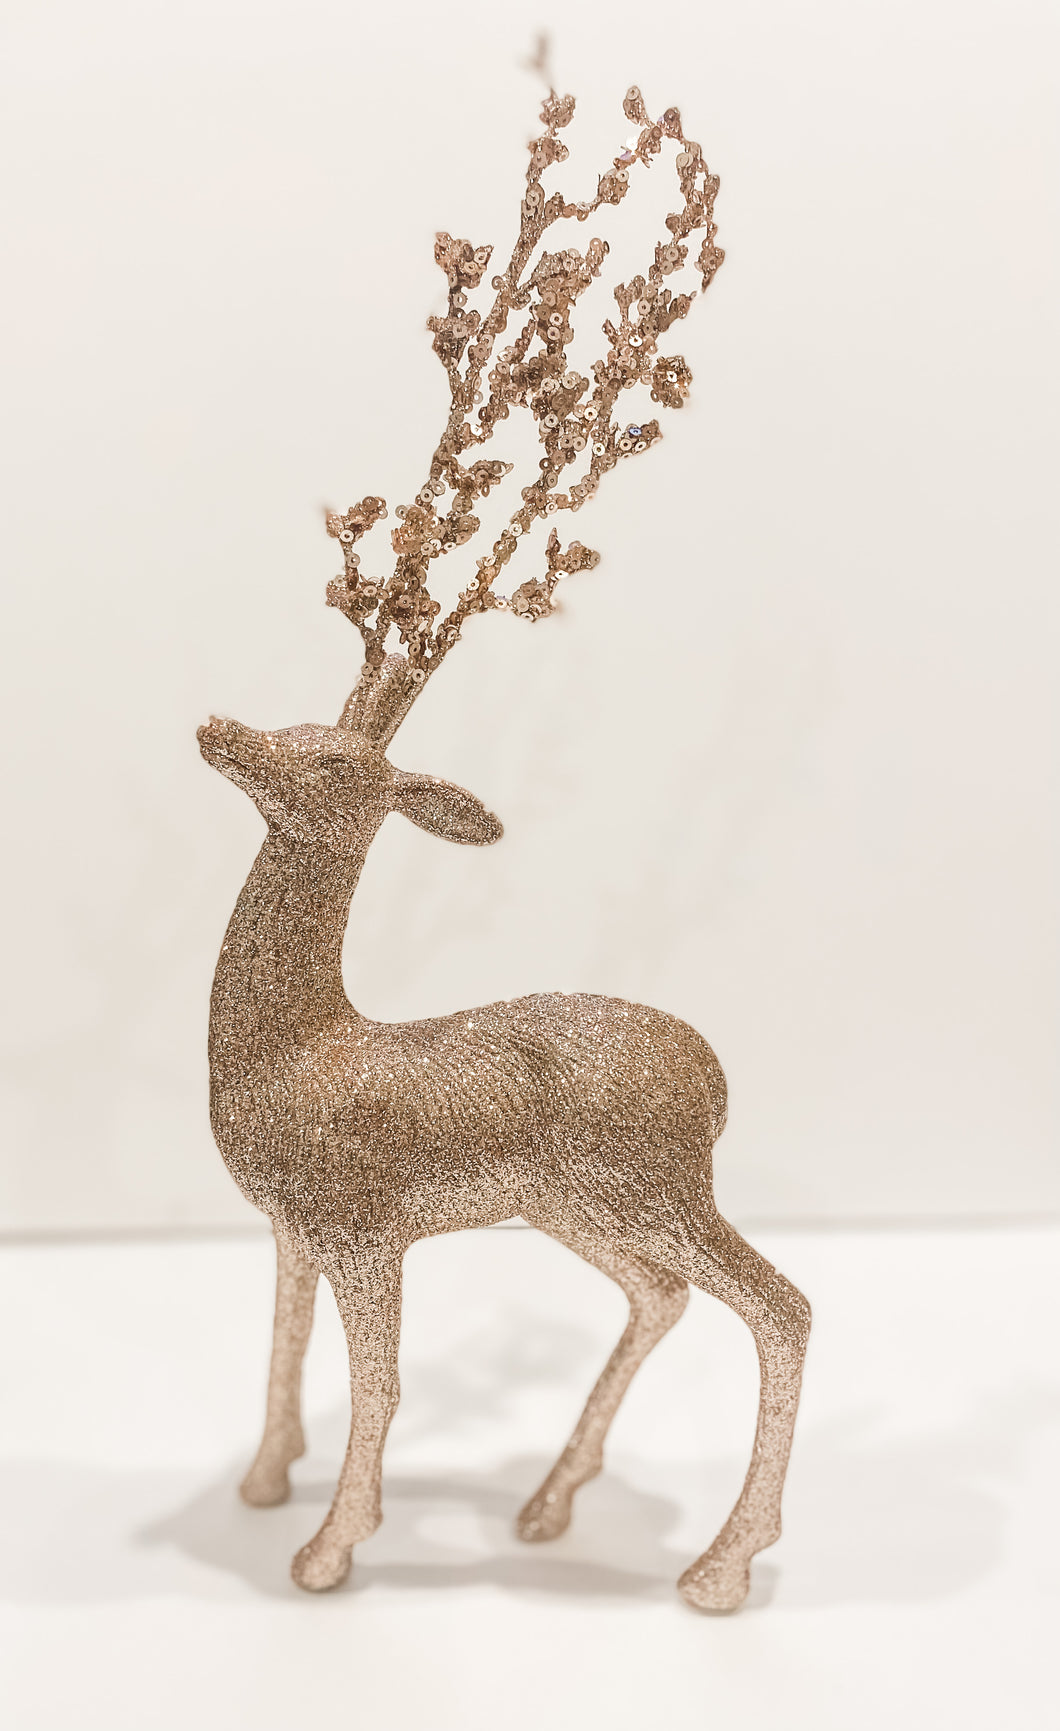 Blush deer with tall antlers